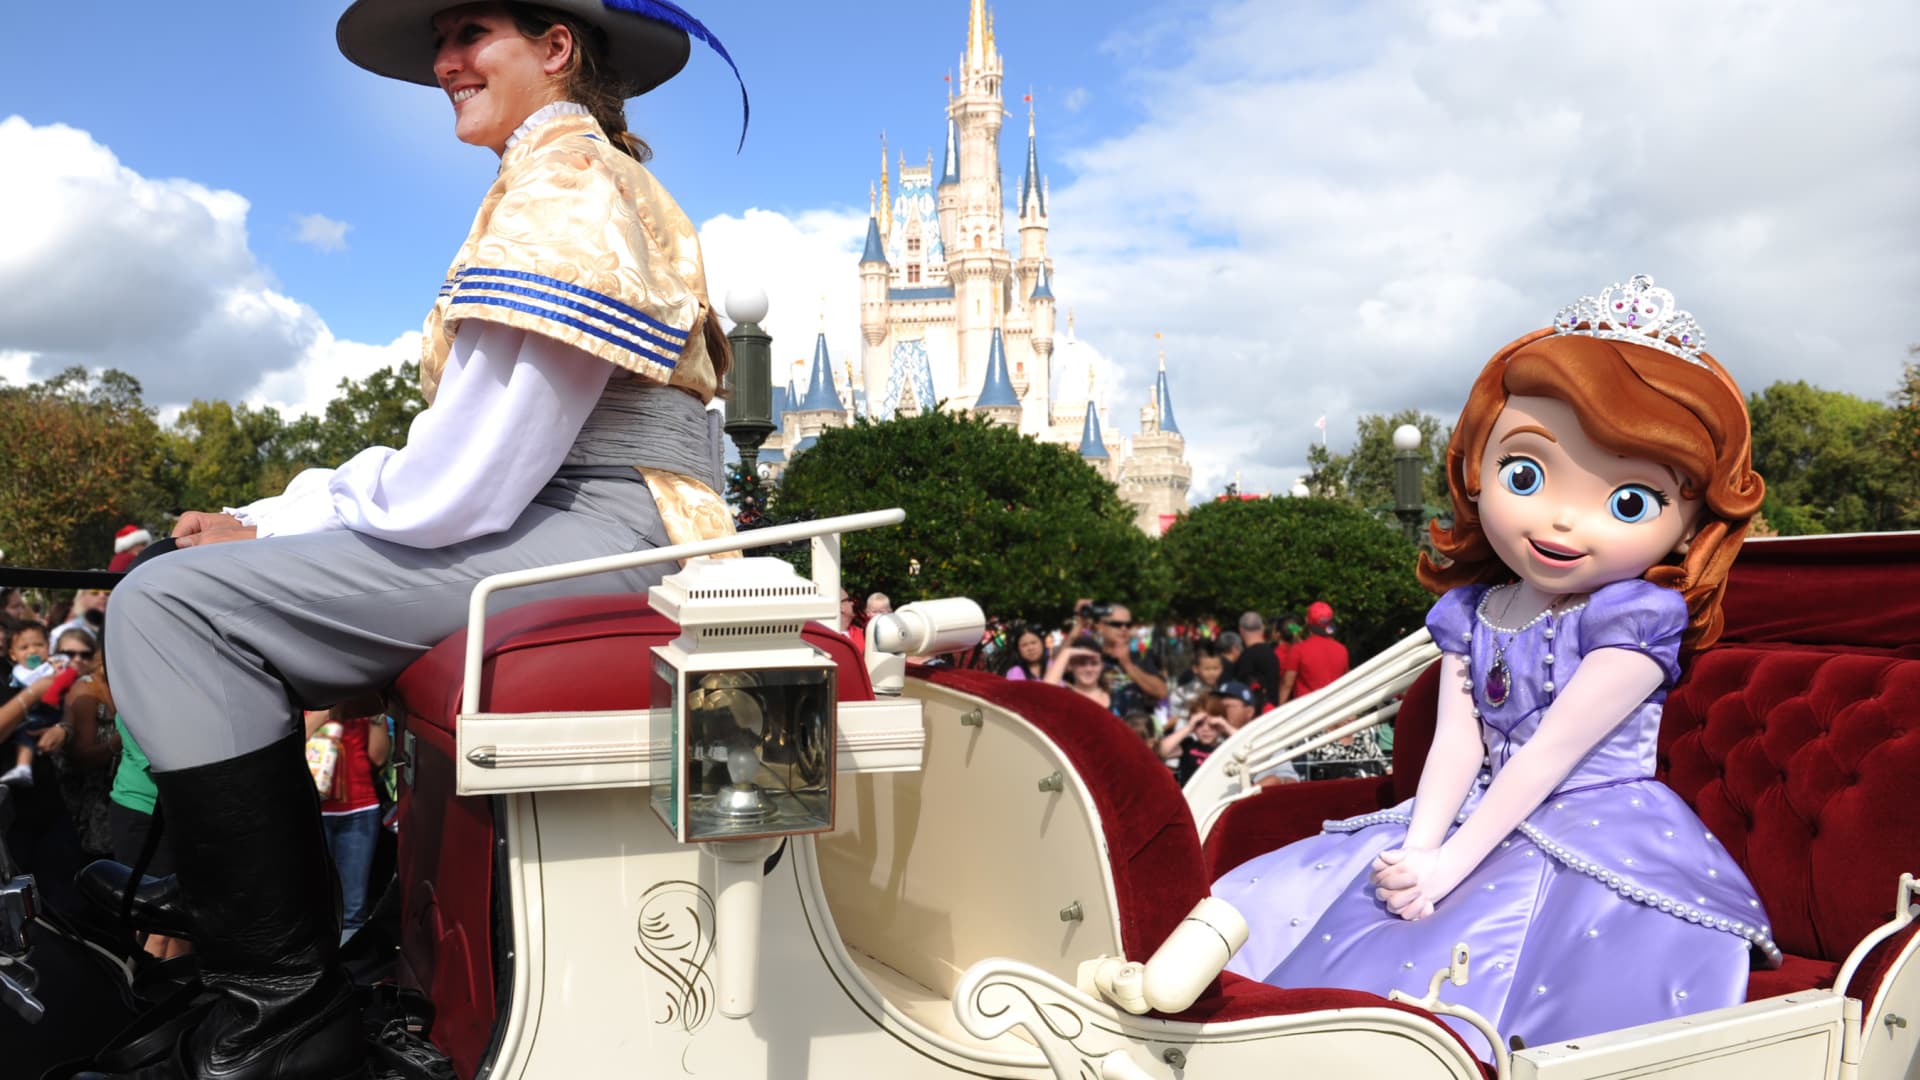 Horse-drawn carriage rides, footgolf (a blend of soccer and golf) and princess makeovers for children are all part of Disney's Enchanting Extras Collection.